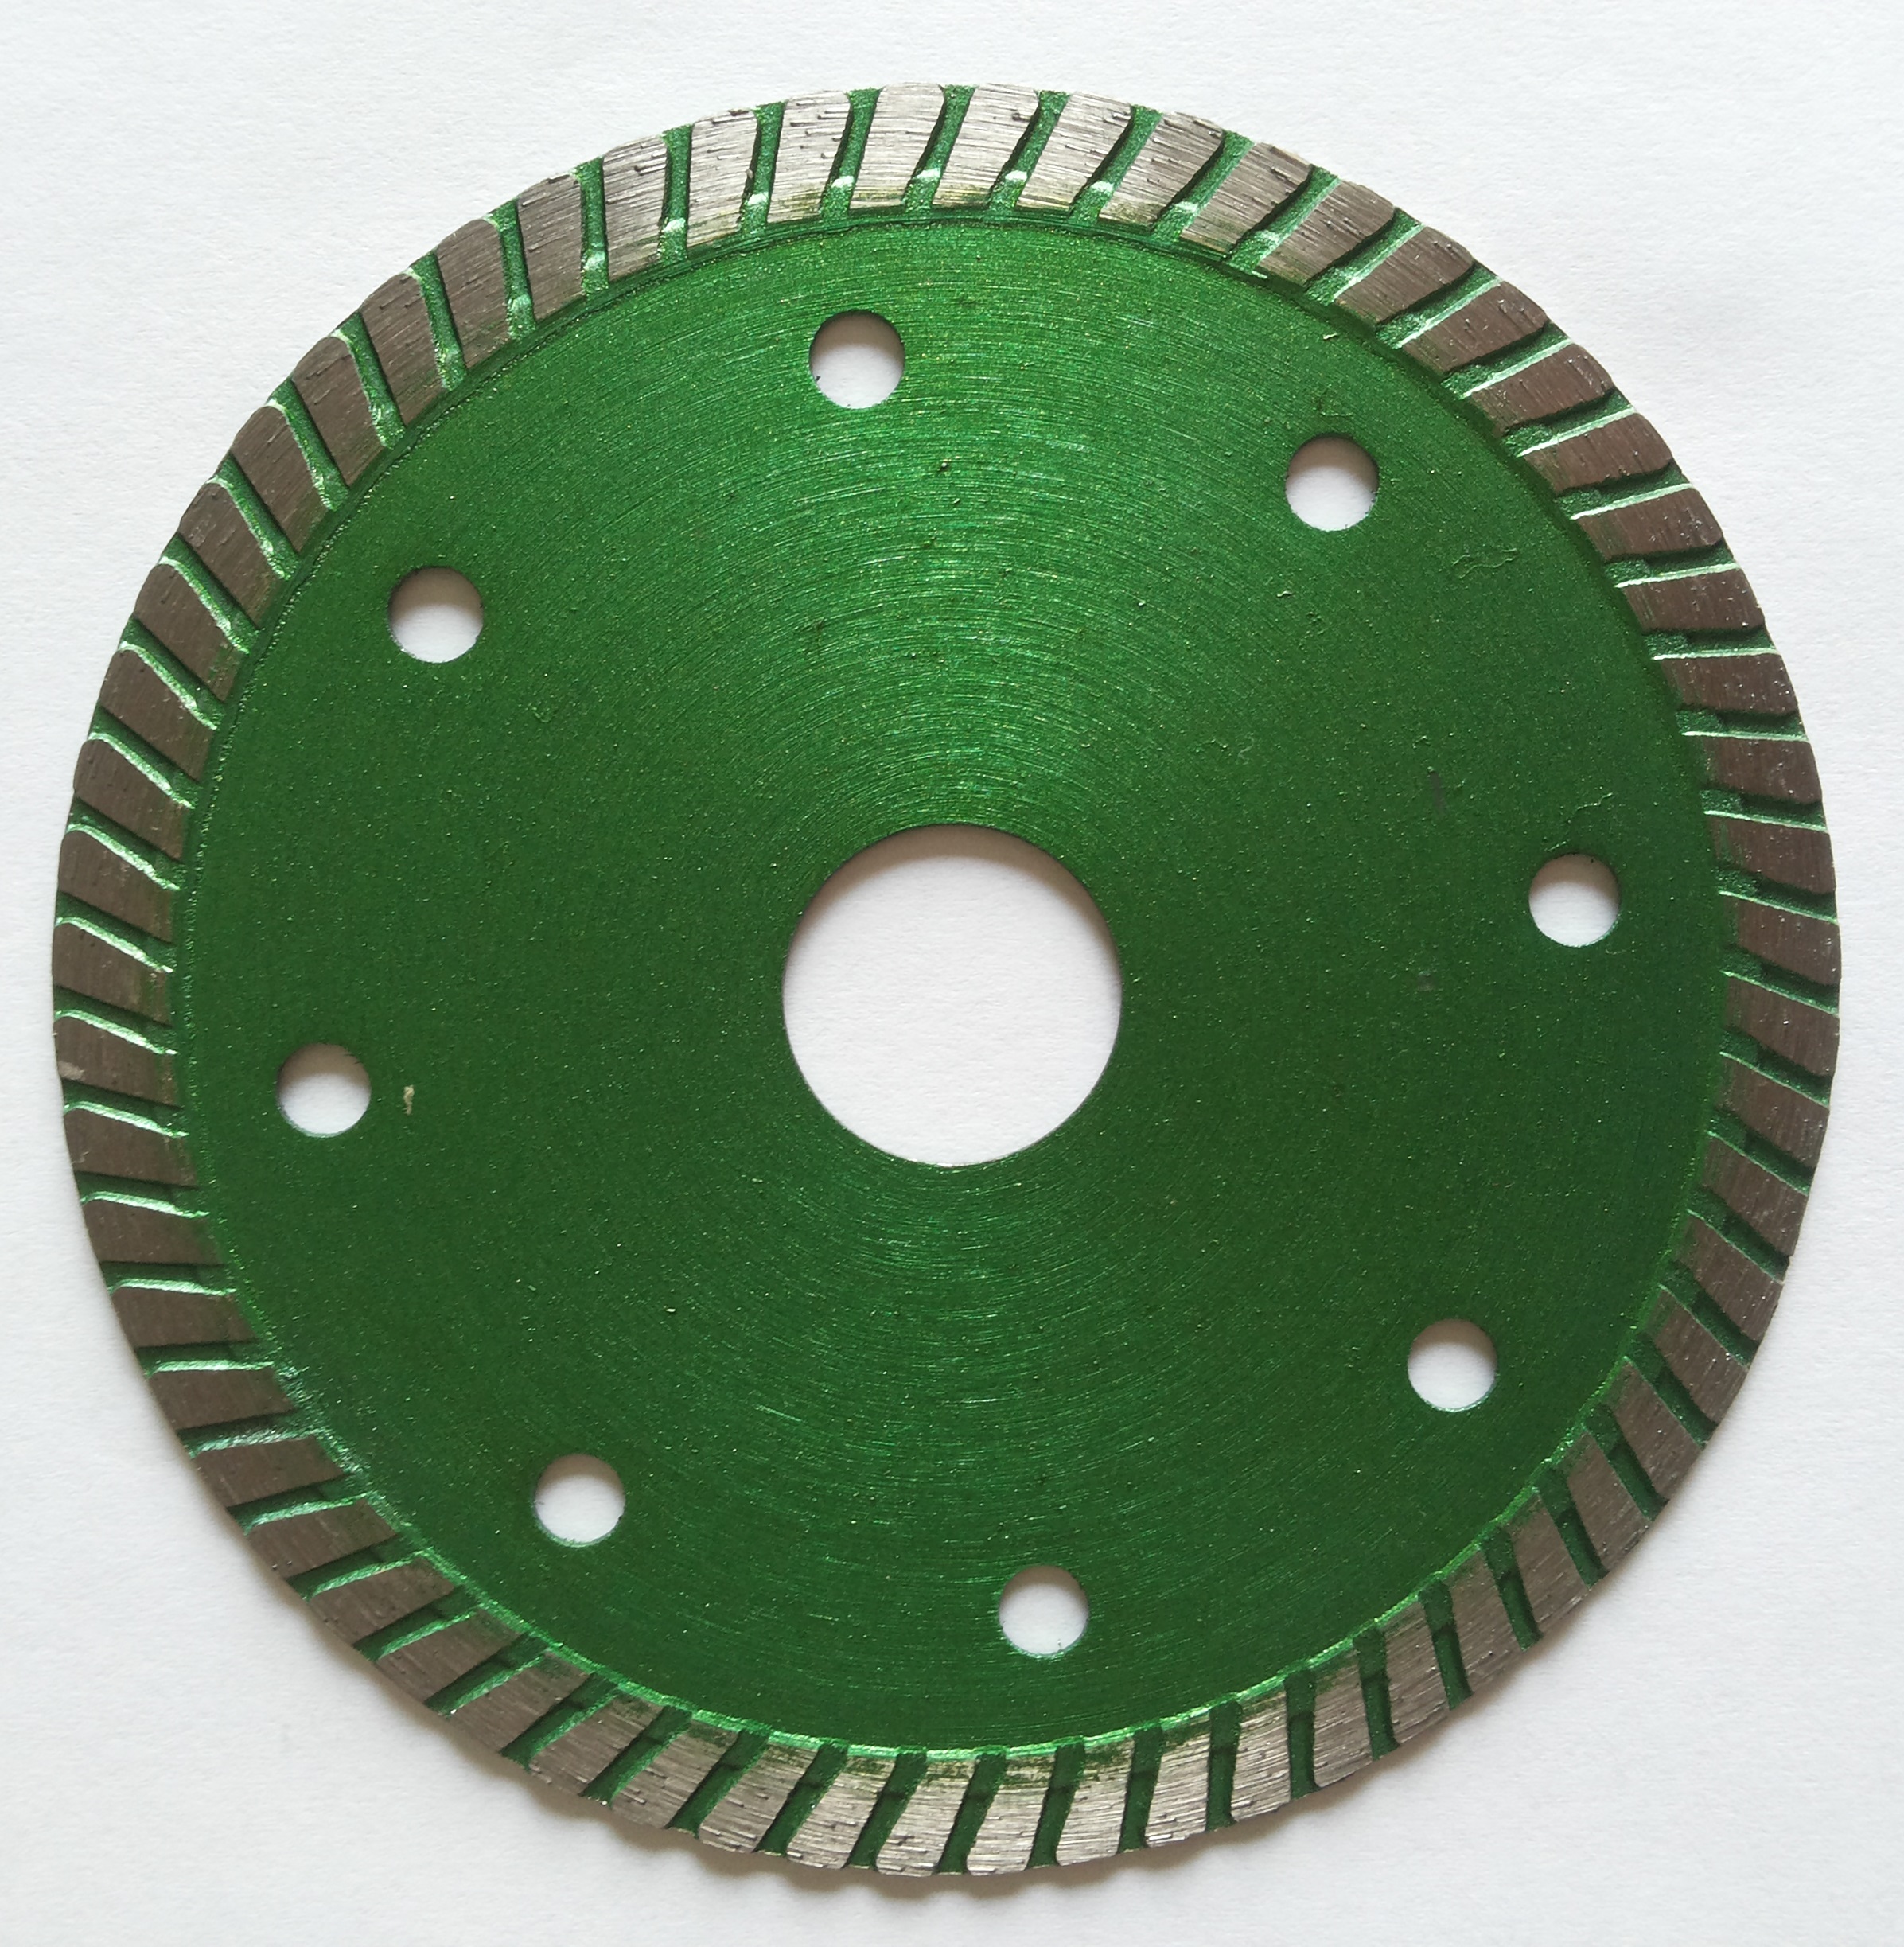 Sintered hot-pressed turbo continous saw blade